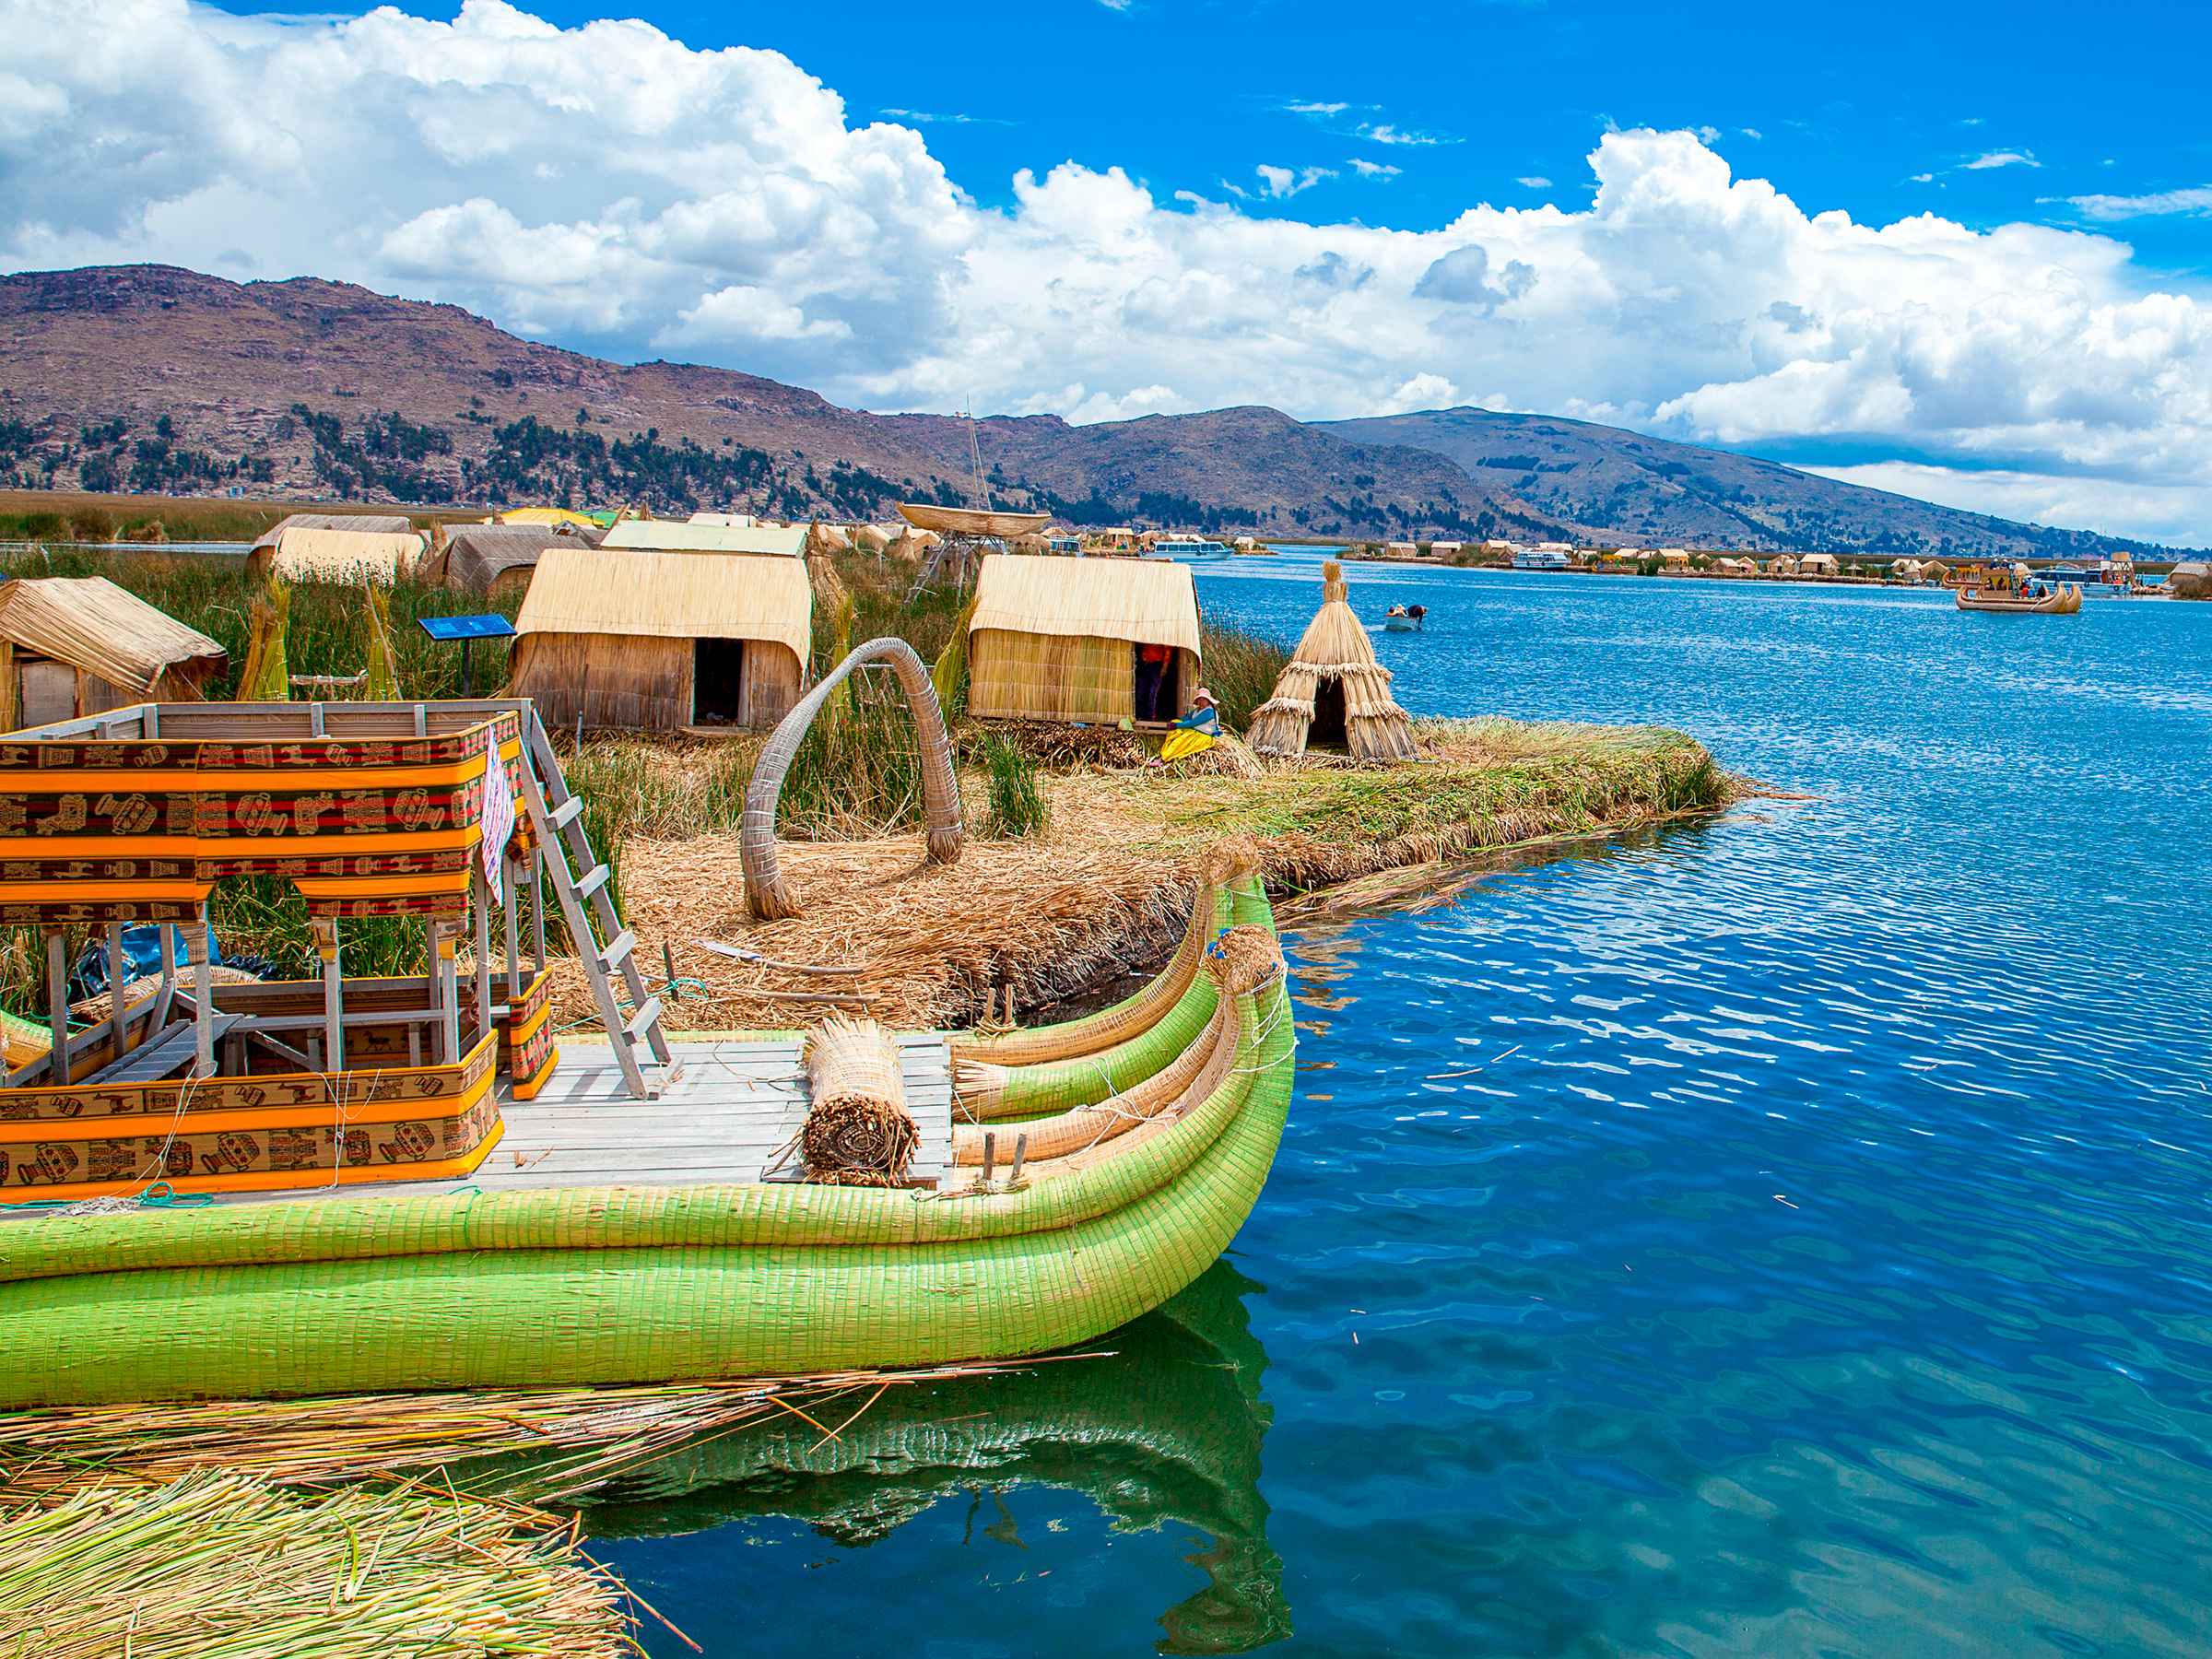 Tour Uros and Taquile Island by Titicaca Boat